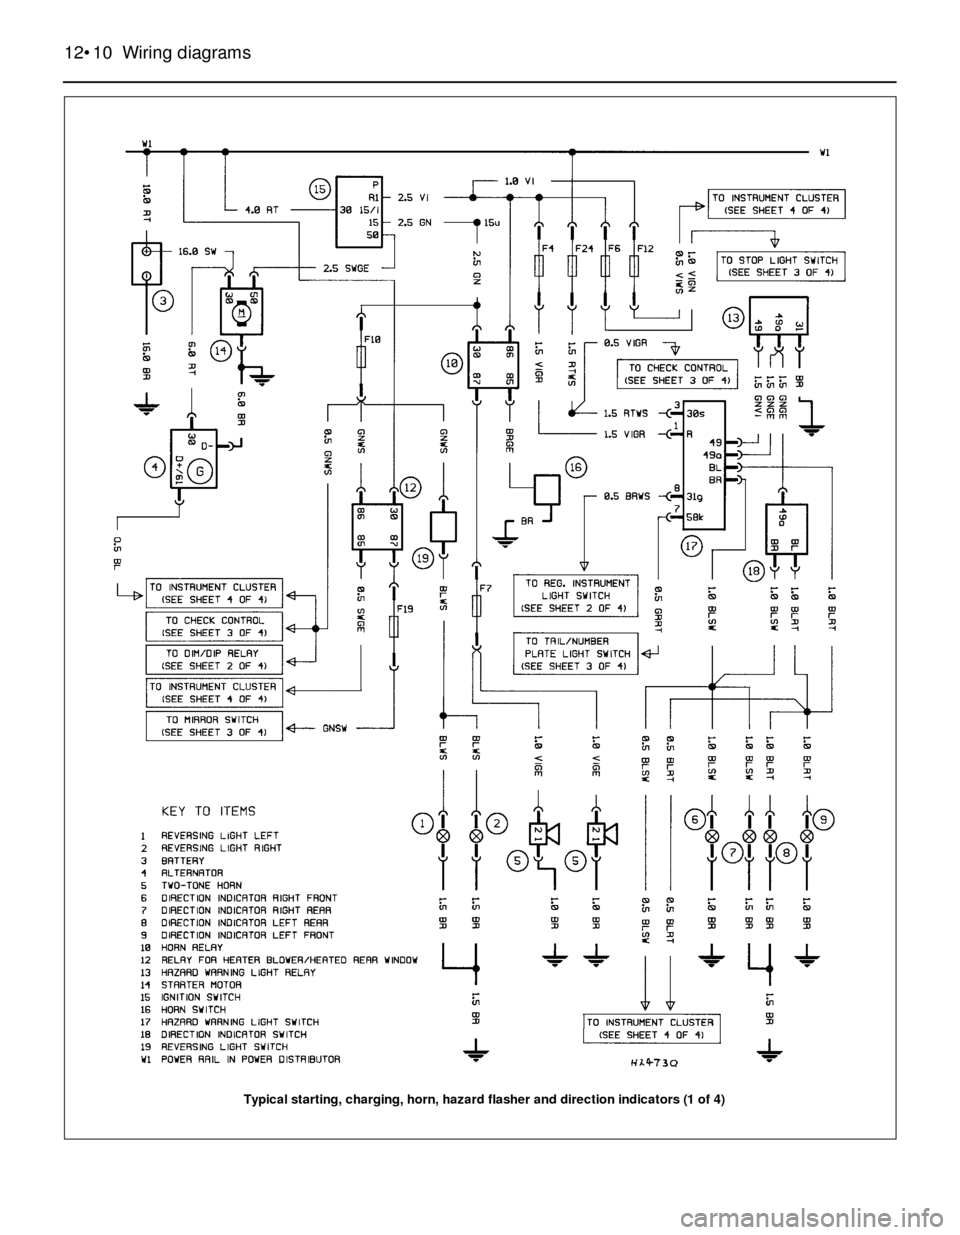 BMW 5 SERIES 1989 E34 Workshop Manual 12•10 Wiring diagrams
Typical starting, charging, horn, hazard flasher and direction indicators (1 of 4) 